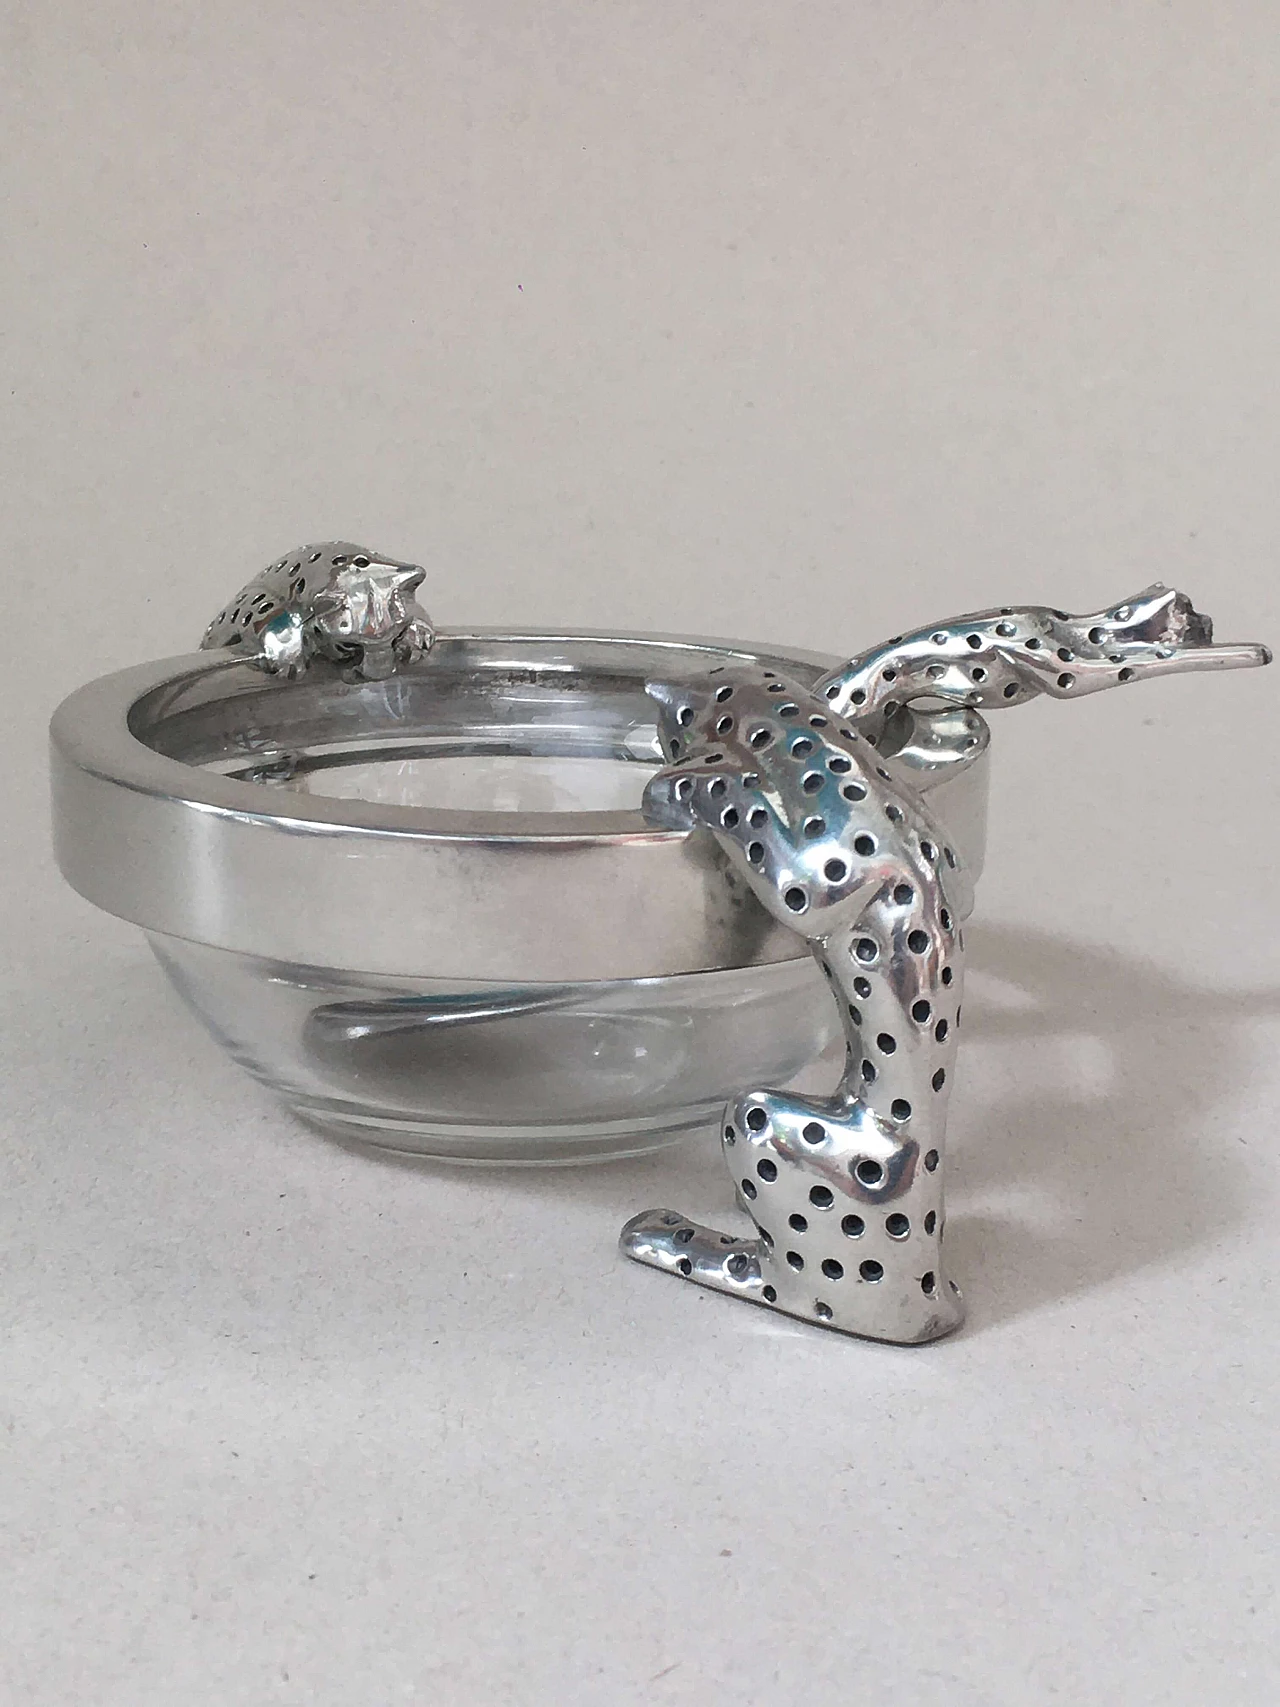 Glass and metal bowl and spoon with cheetahs 3